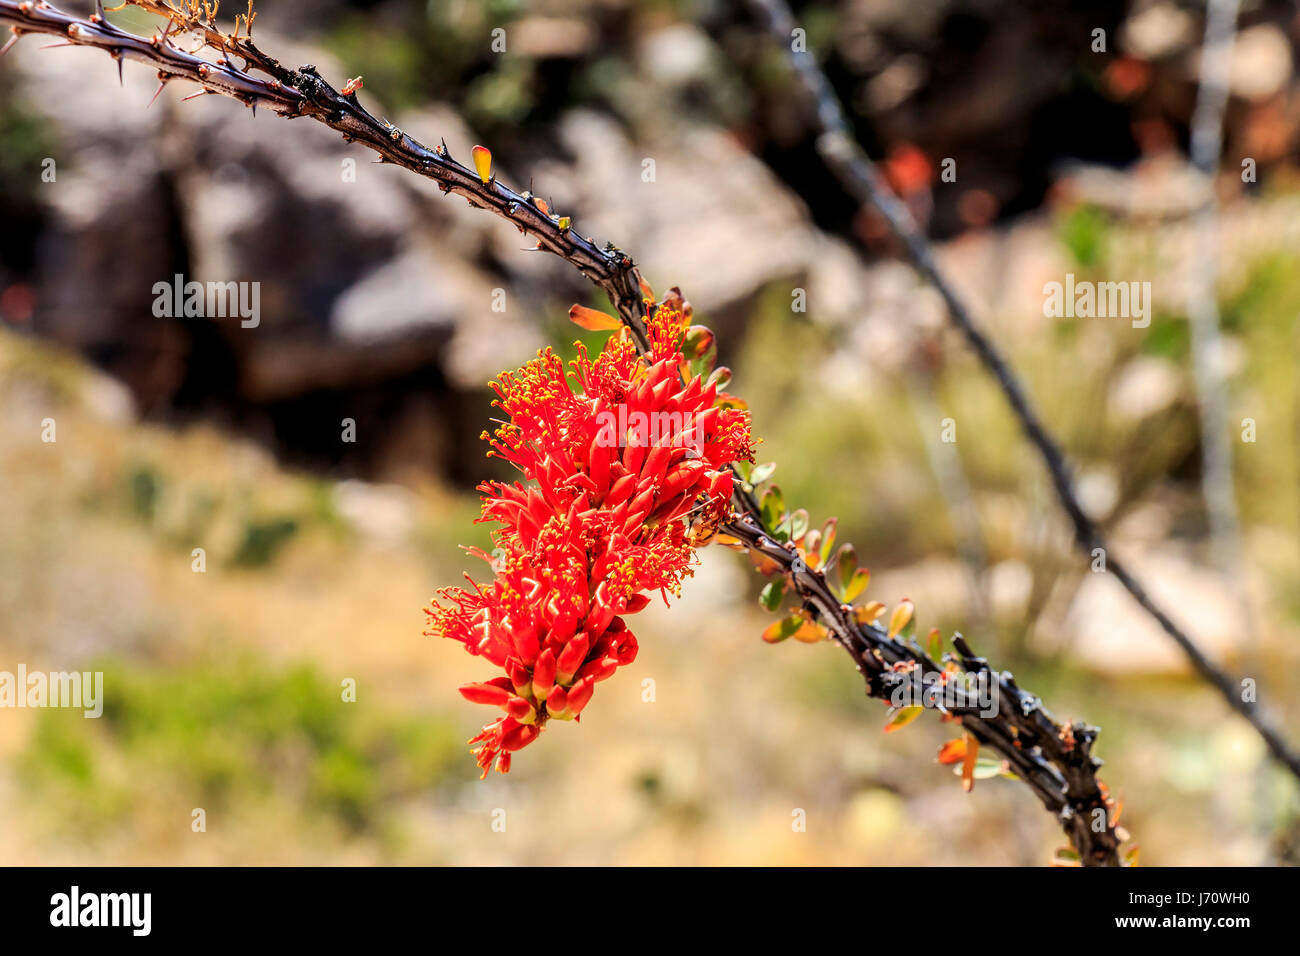 Ocotillo bloom. Fouquieria splendens (commonly known as ocotillo) is also called coachwhip, candlewood, slimwood, desert coral, Jacob's staff, Jacob c Stock Photo